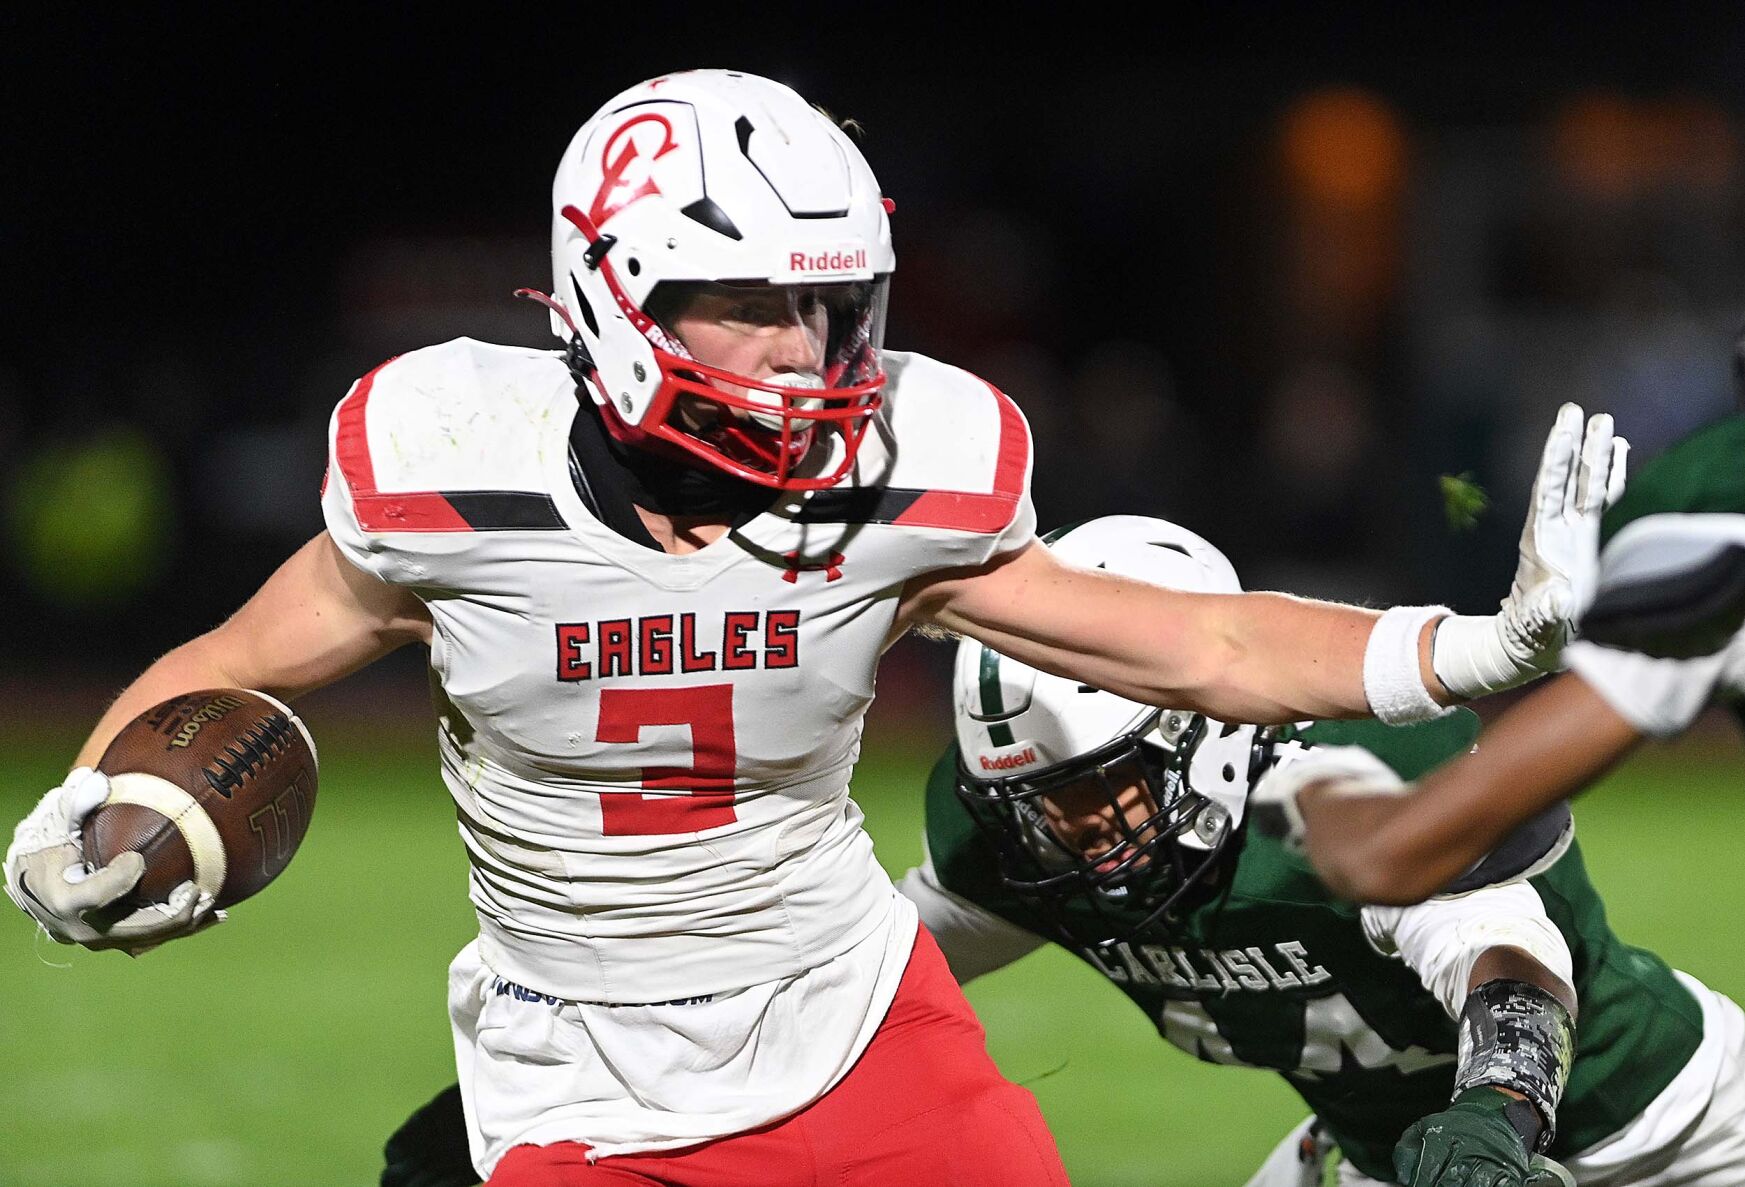 Cumberland Valley aims for fifth consecutive win after slow start